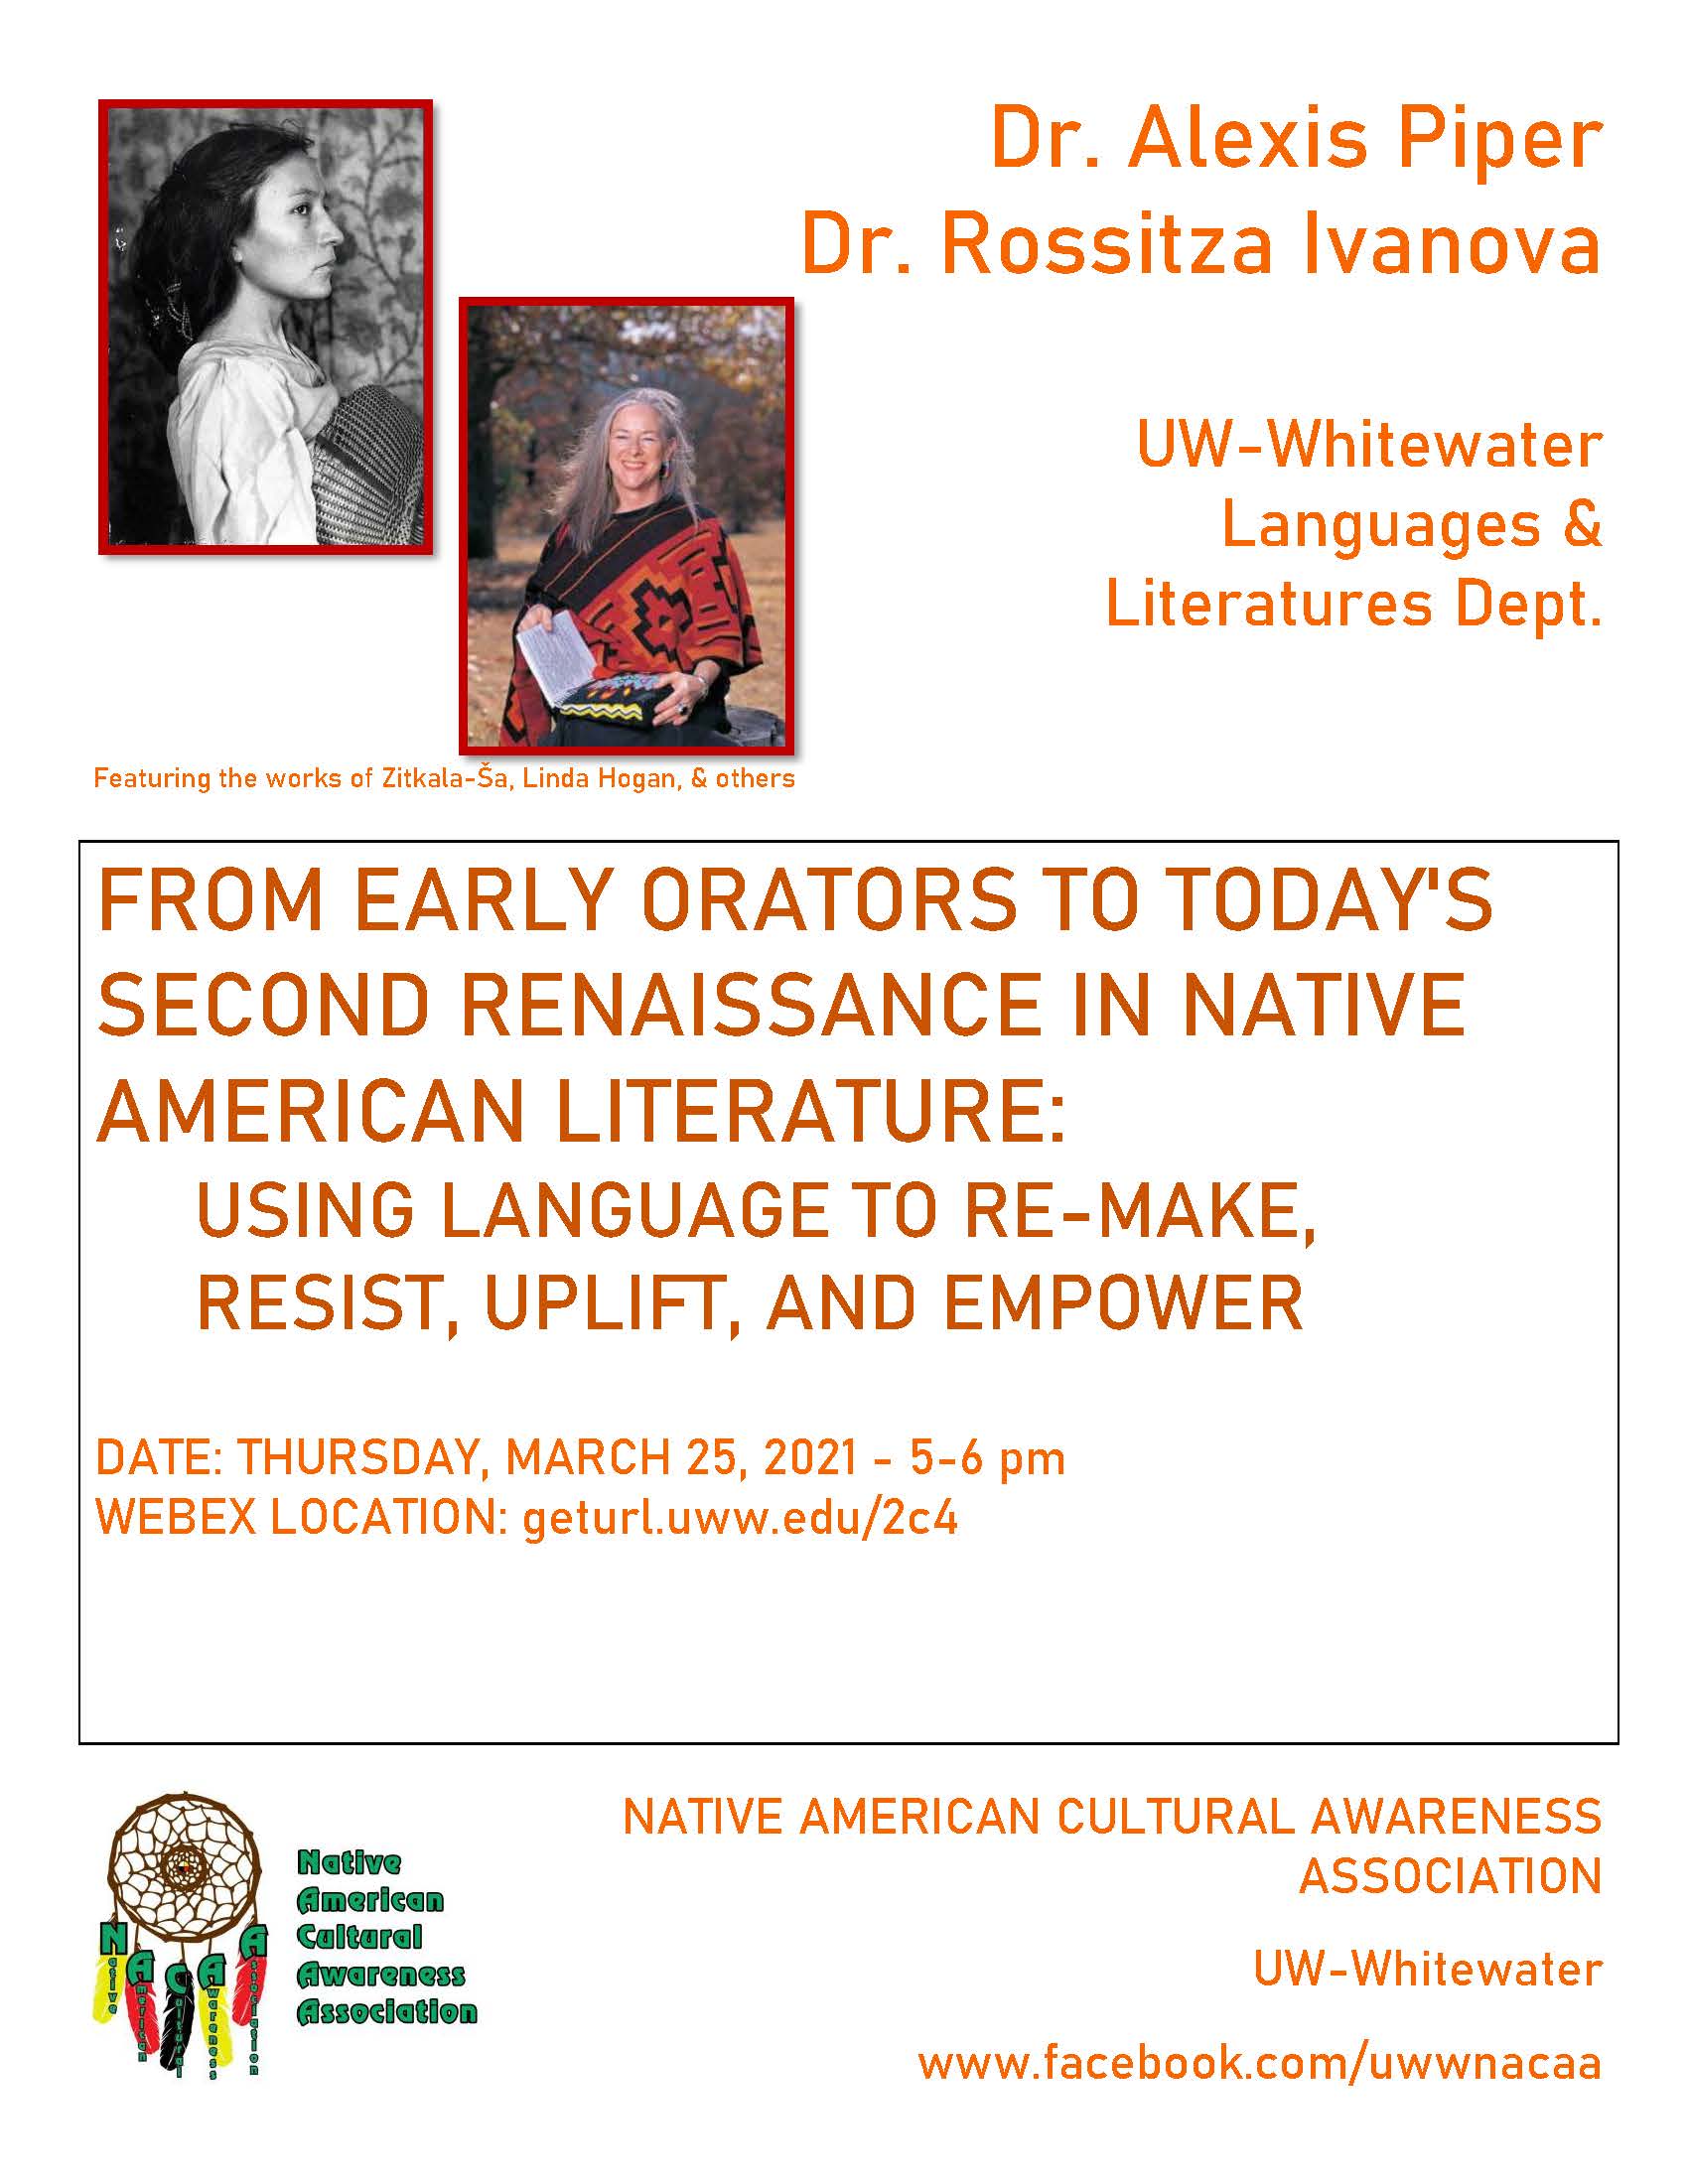 From Early Oragors to Today's Second Renaissance in Native American Literature: Uswing Language to Re-make, Resist, Uplift, and Empower poster